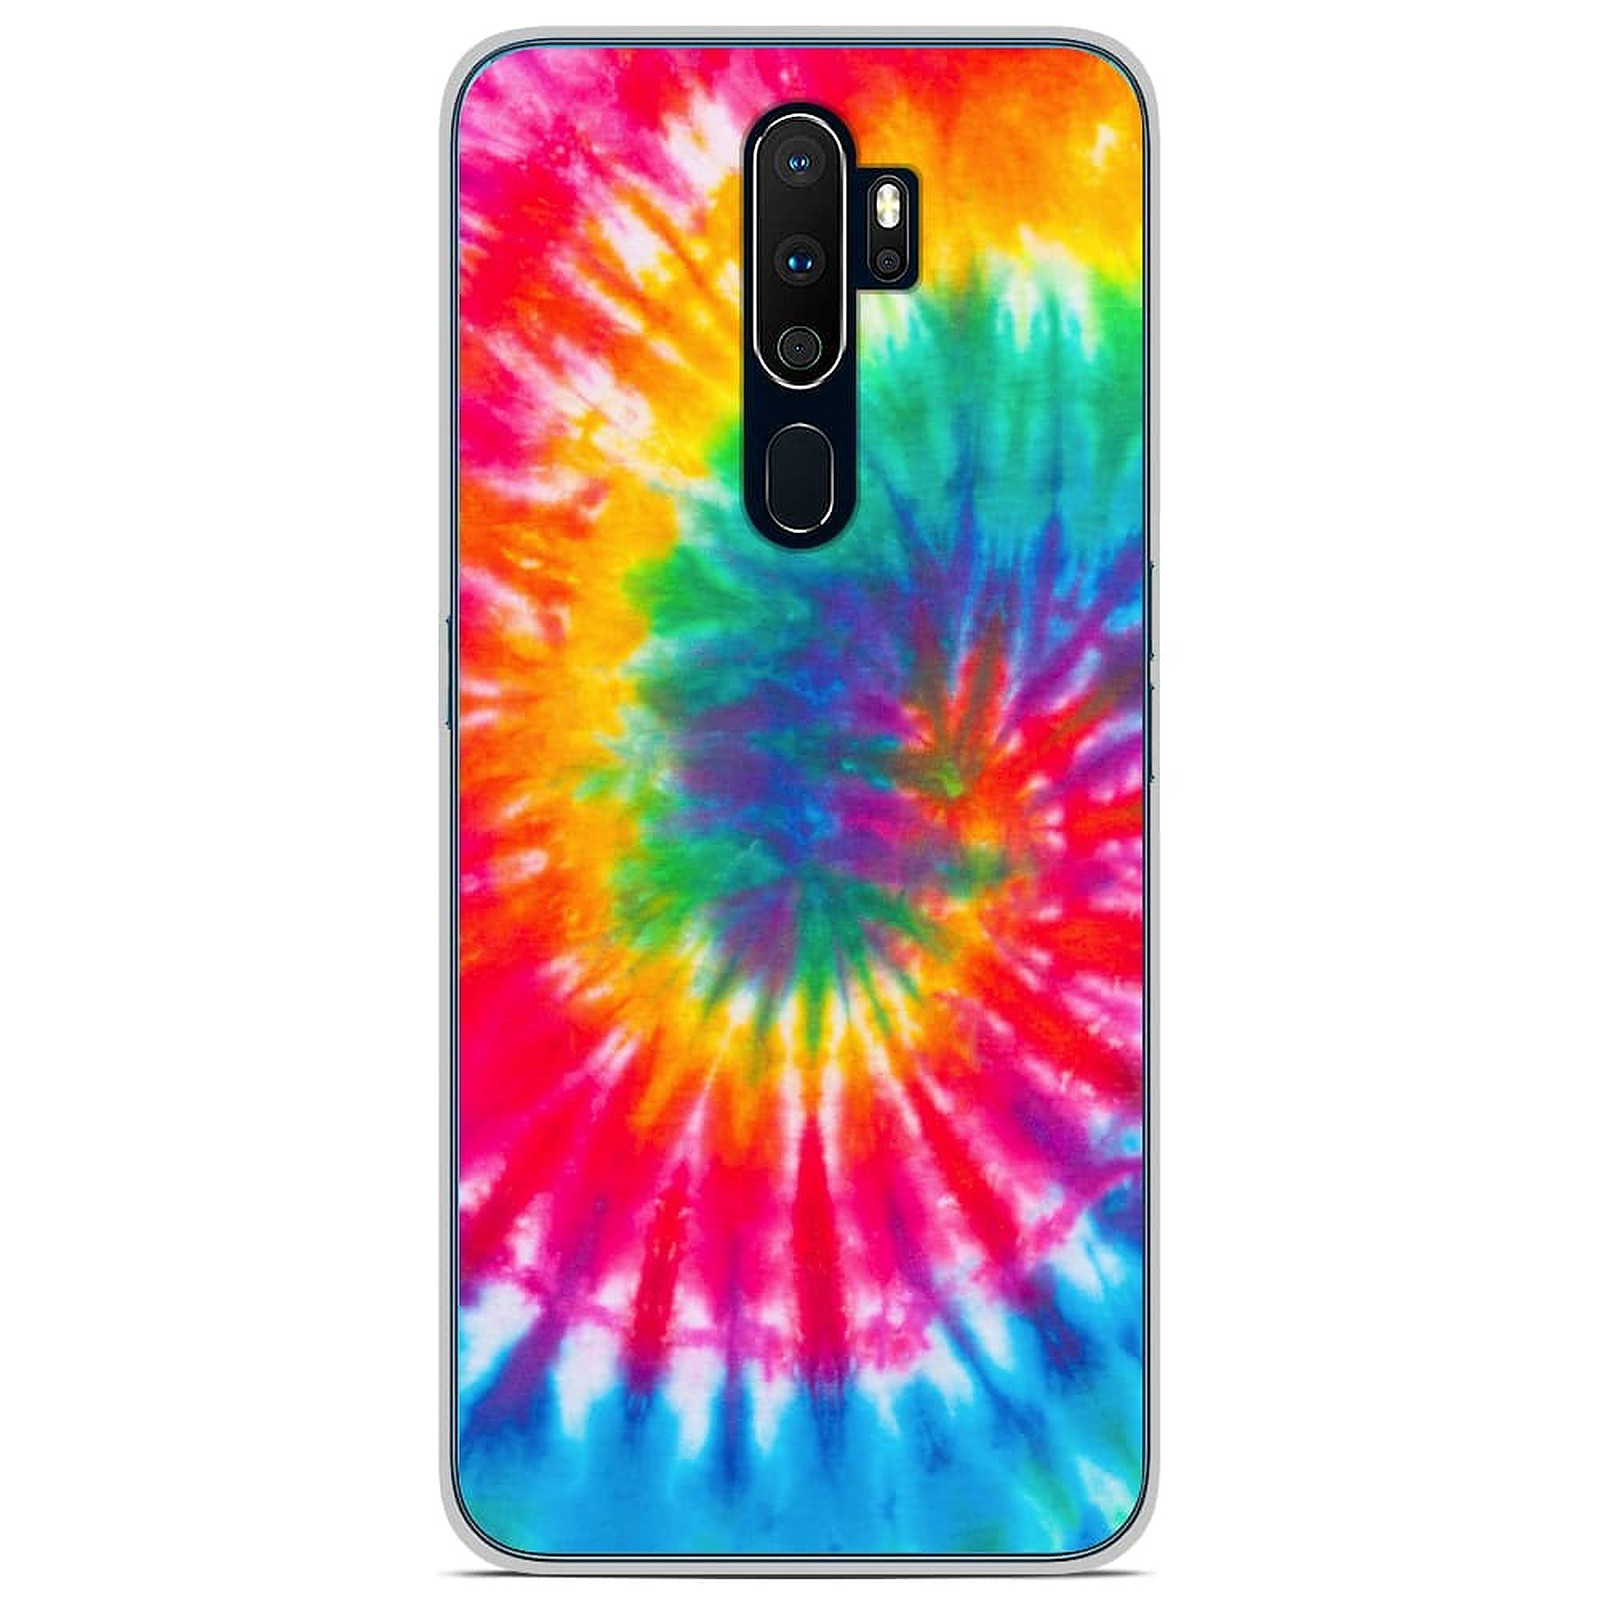 1001 Coques Coque silicone gel Oppo A5 2020 motif Tie Dye Spirale - Coque telephone 1001Coques